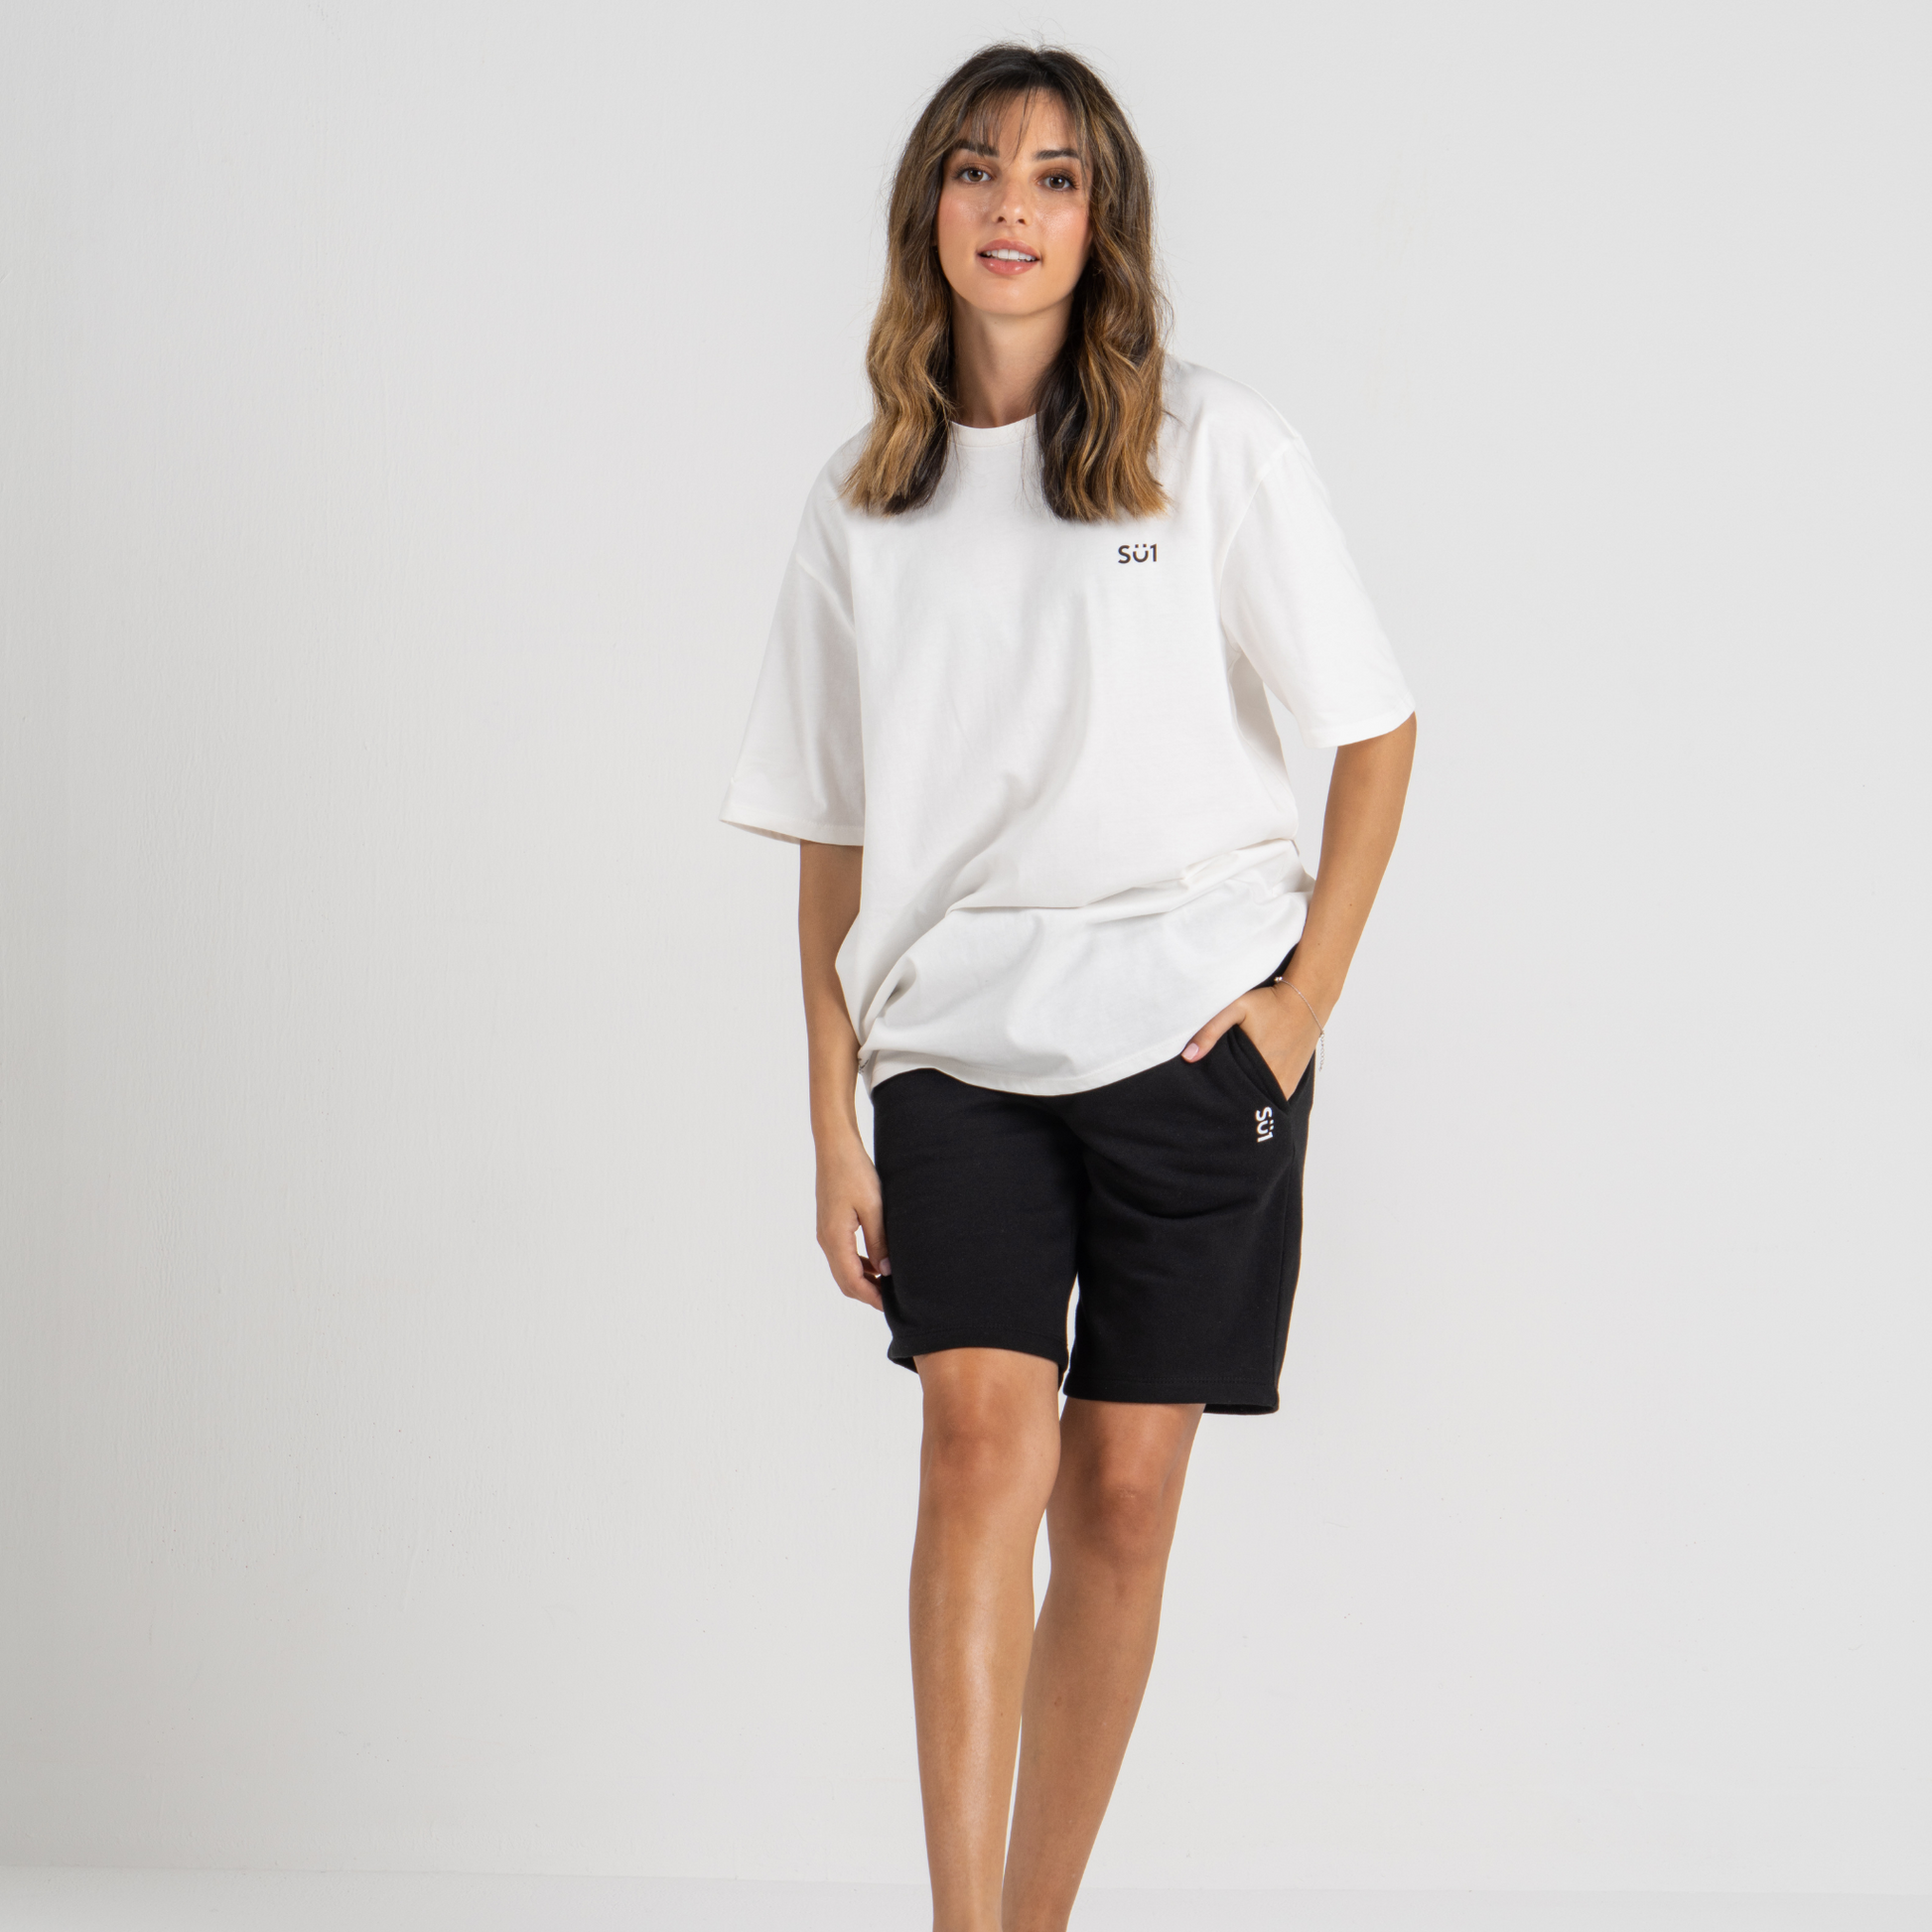 Woman wearing beige tshirt oversized with black shorts SU1 clothing brand 